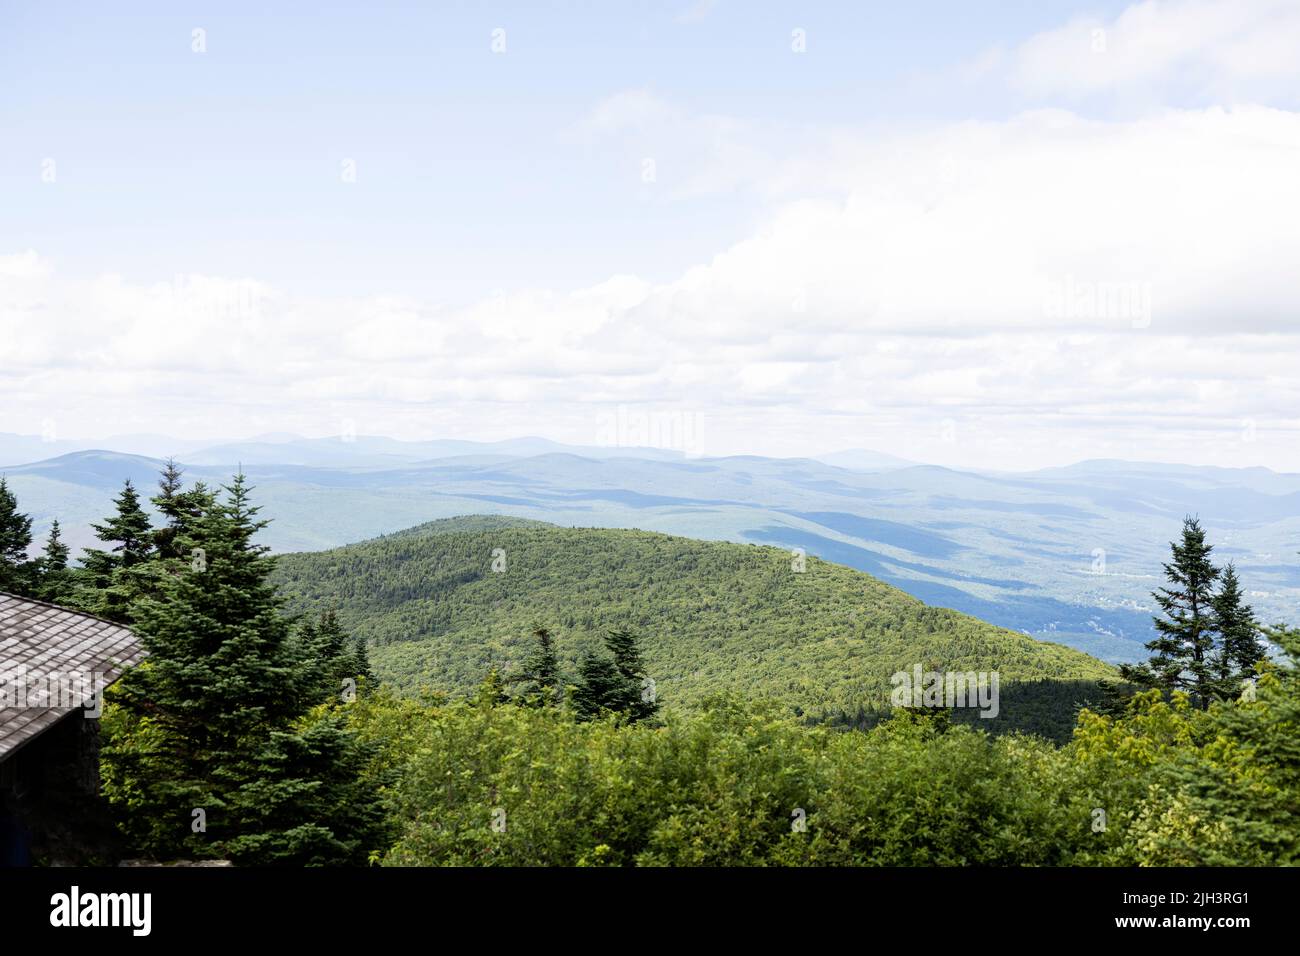 The view of the Berkshires from Mount Greylock, the tallest mountain in Massachusetts, USA, on a summer day. Stock Photo